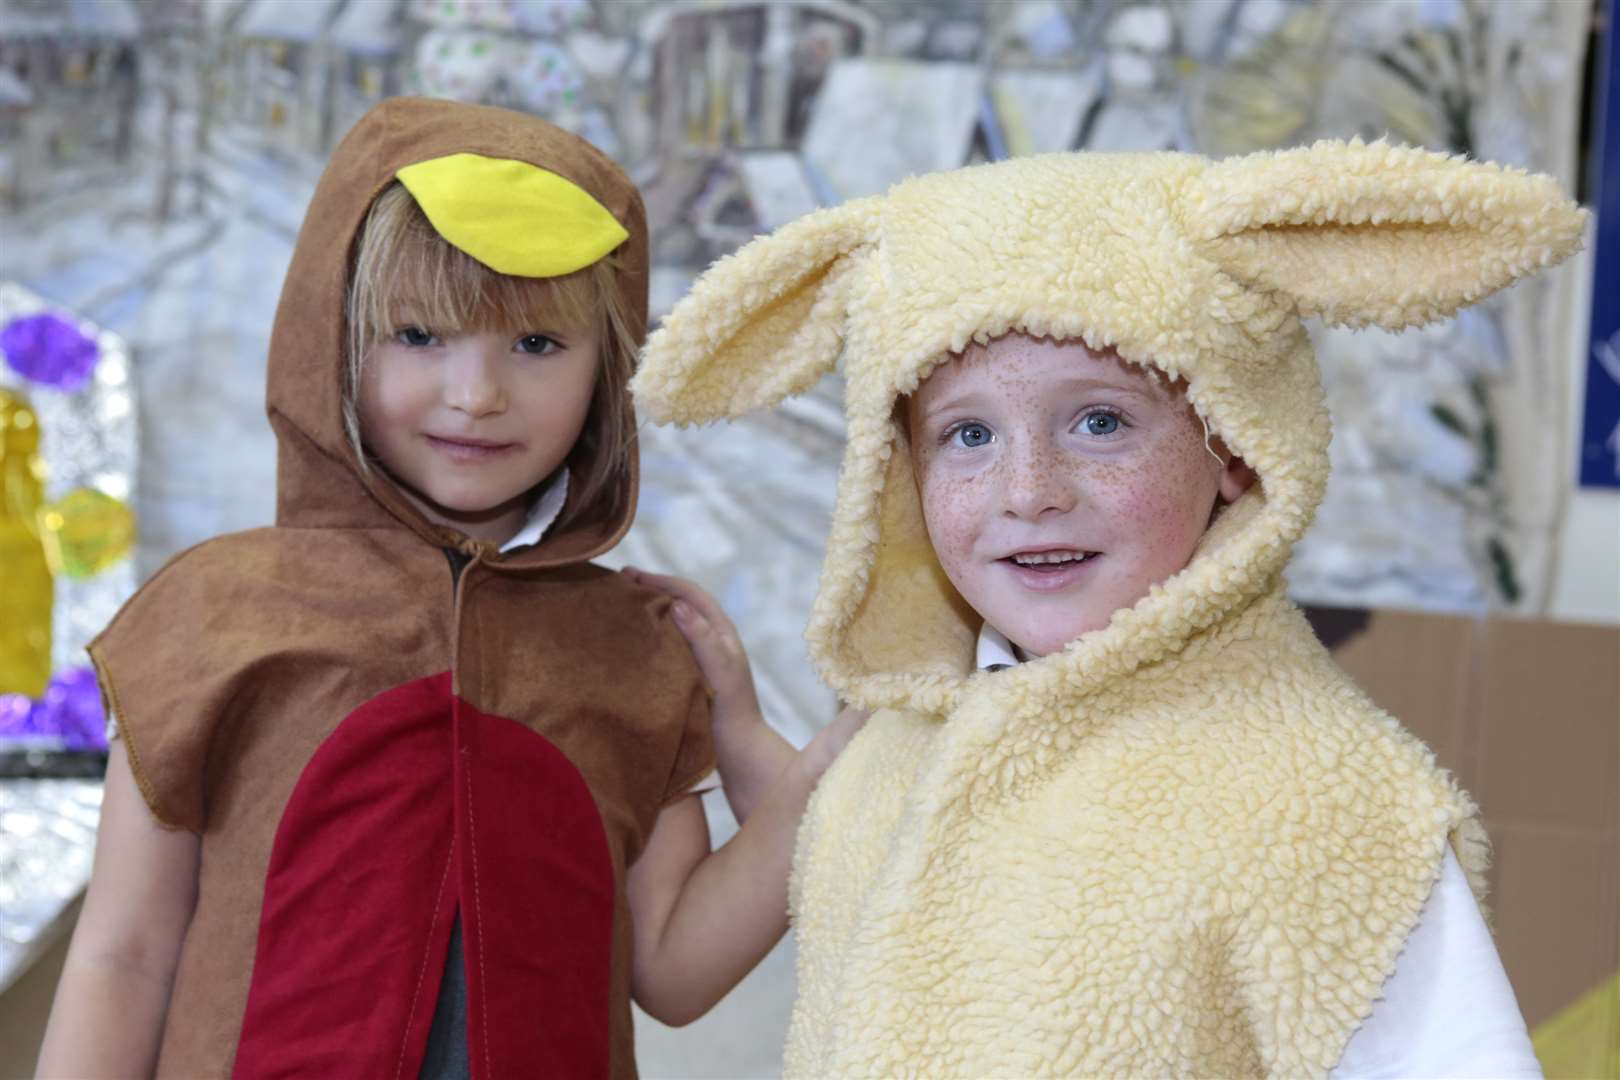 Regis Manor youngsters dressed as farmyard animals